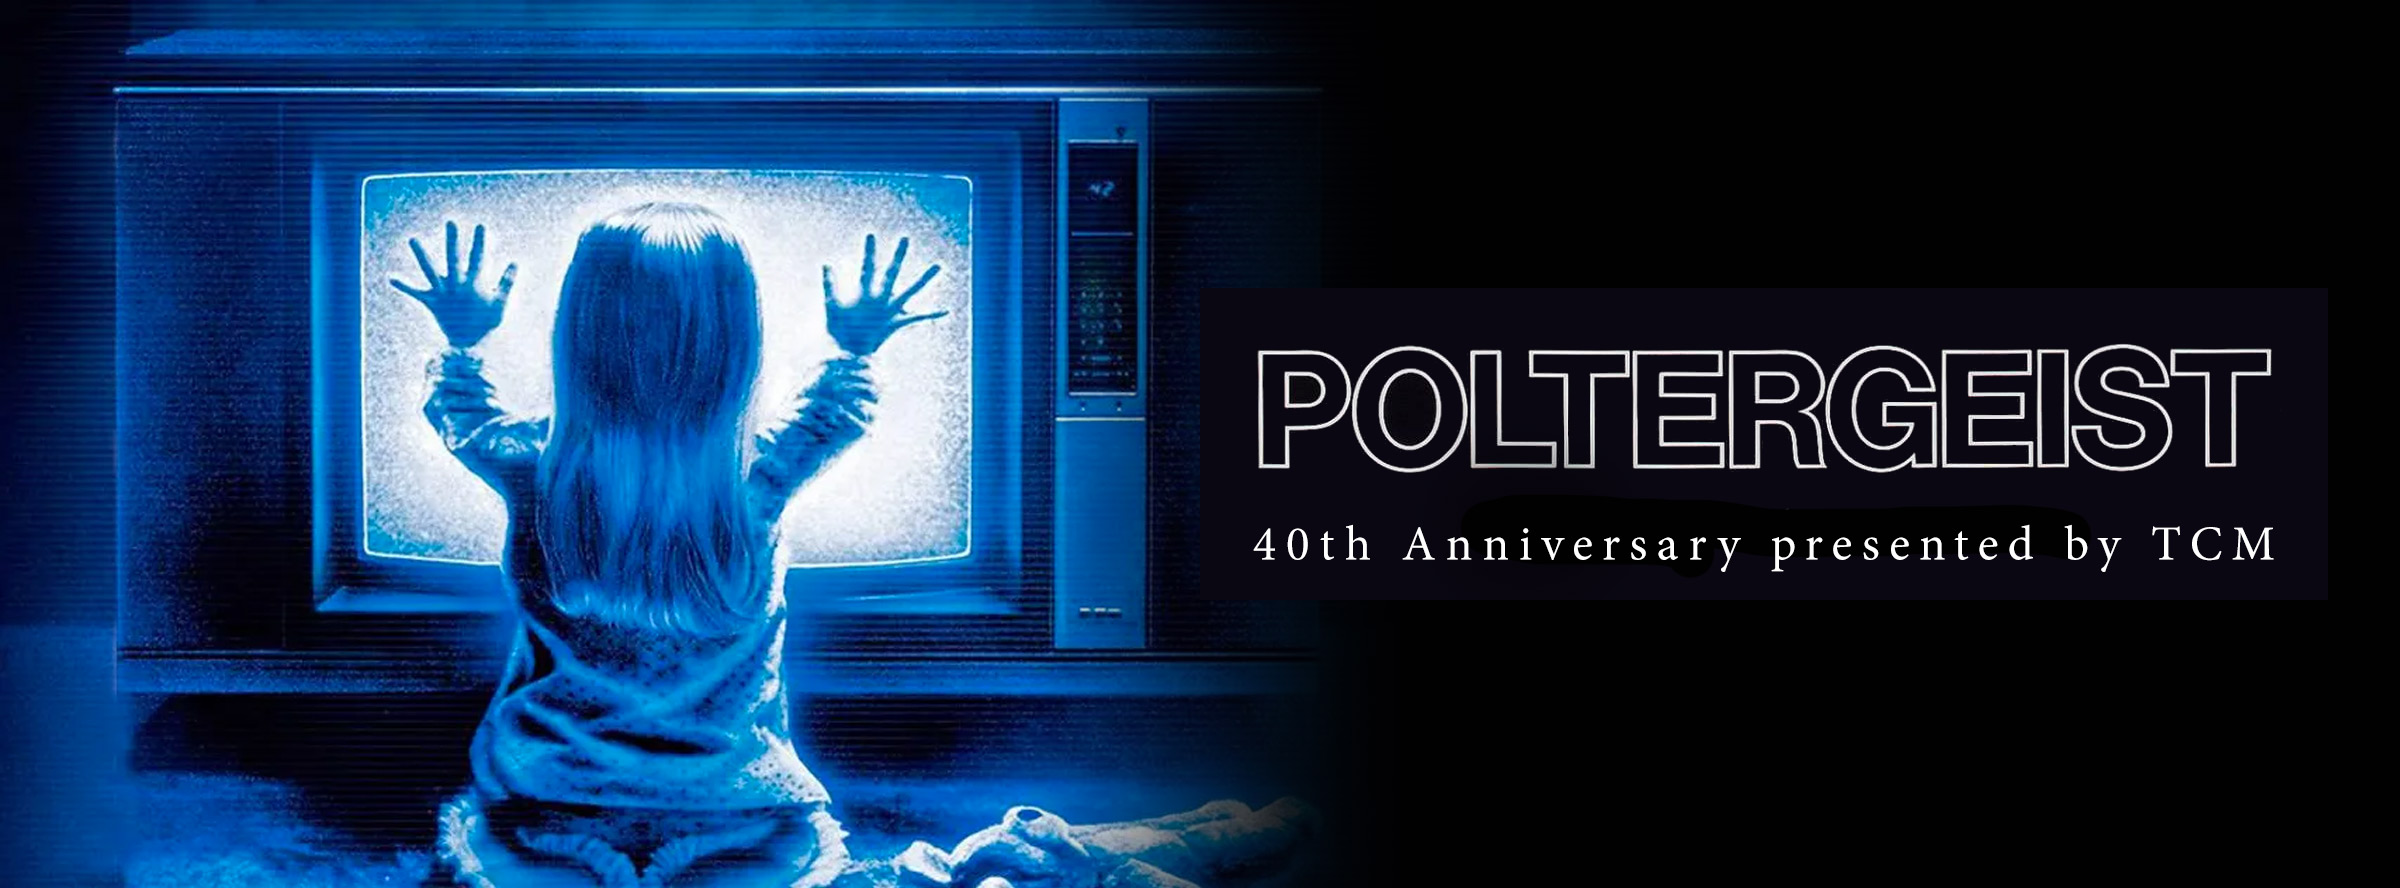 poltergeist-40th-anniversary-presented-by-tcm